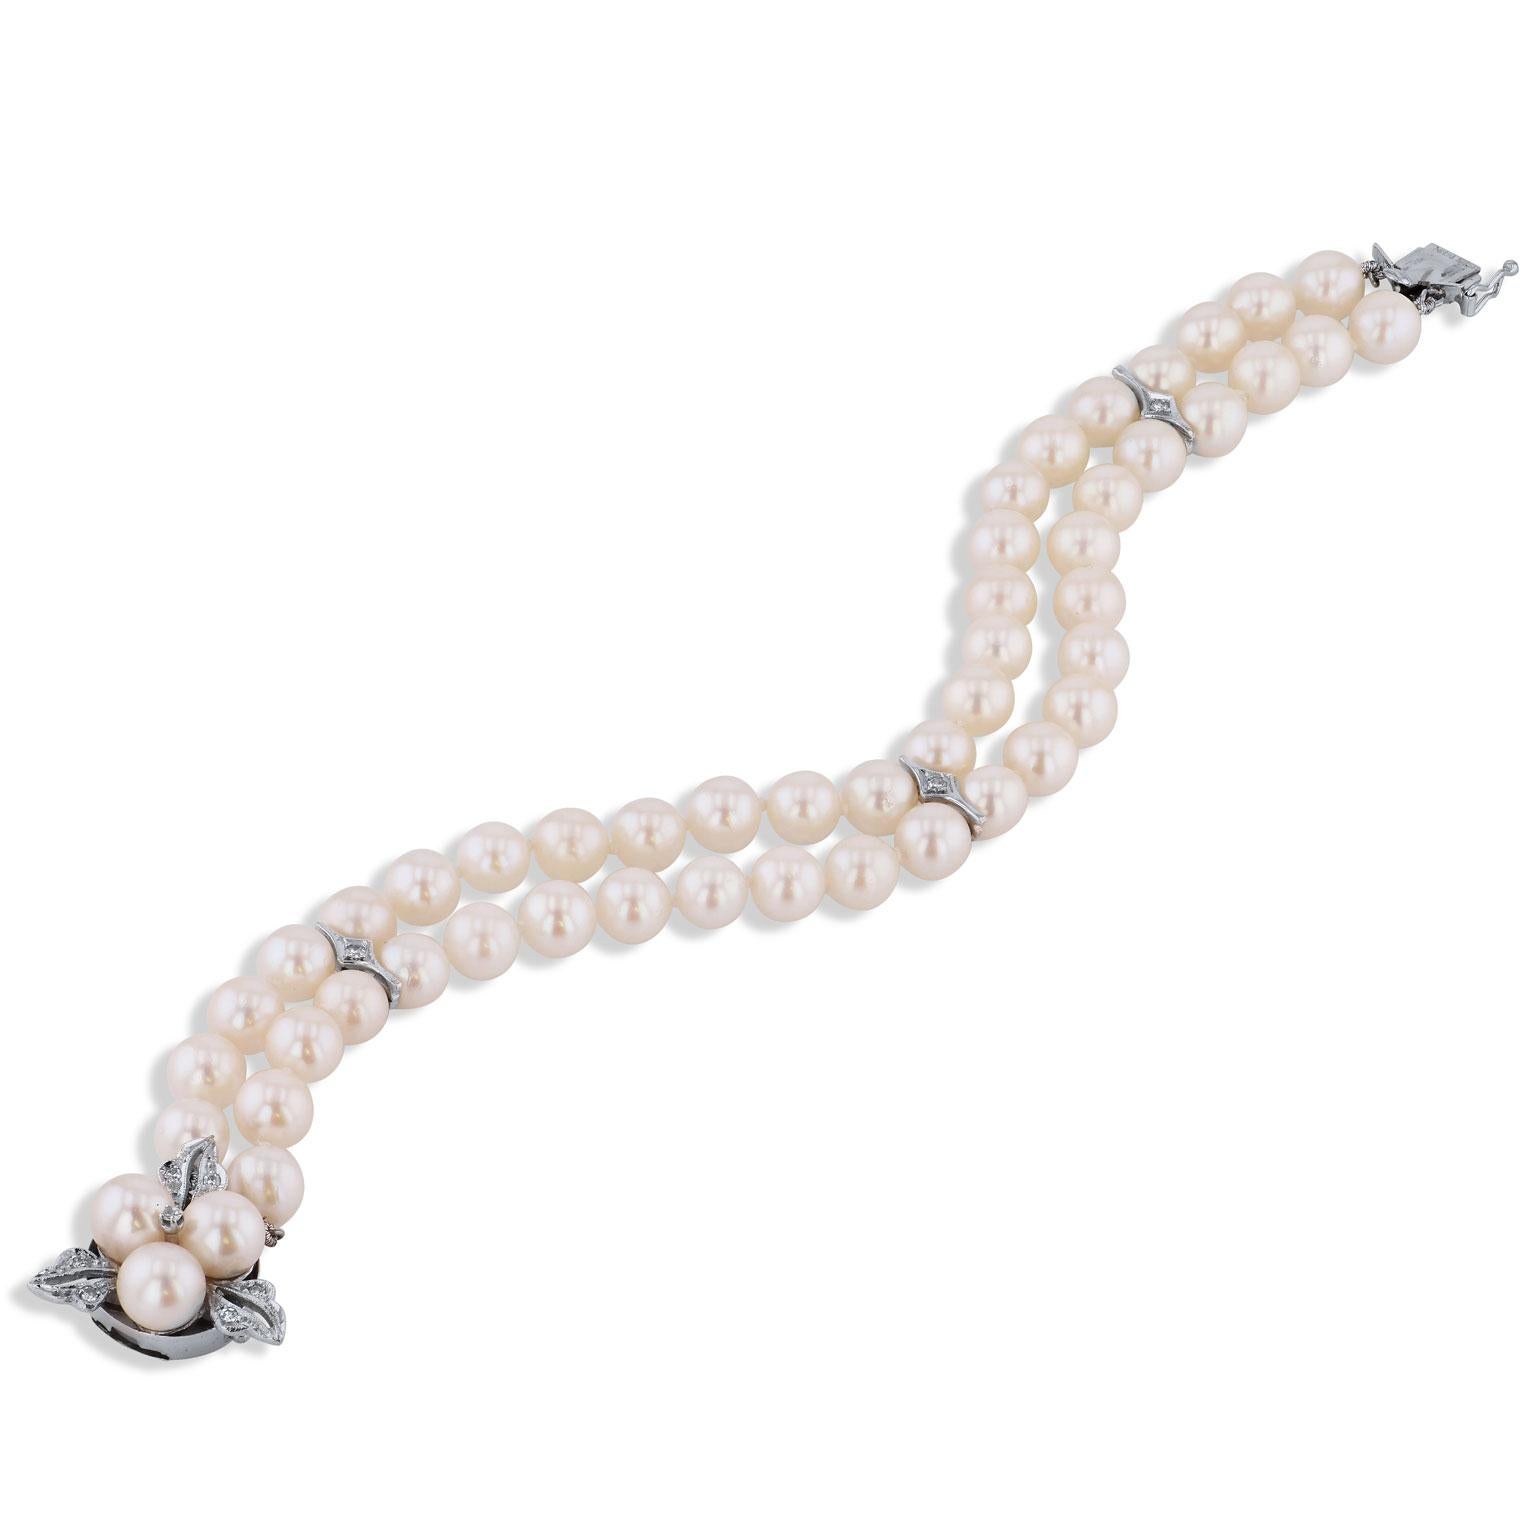 Estate Akoya Pearl and 0.10 Carat Diamond 14 karat White Gold Pearl Bracelet

Crafted in 14 karat white gold, this previously loved bracelet is composed of two strands of 6 millimeter- 6.5 millimeter of iridescent Akoya pearls. The bracelet features